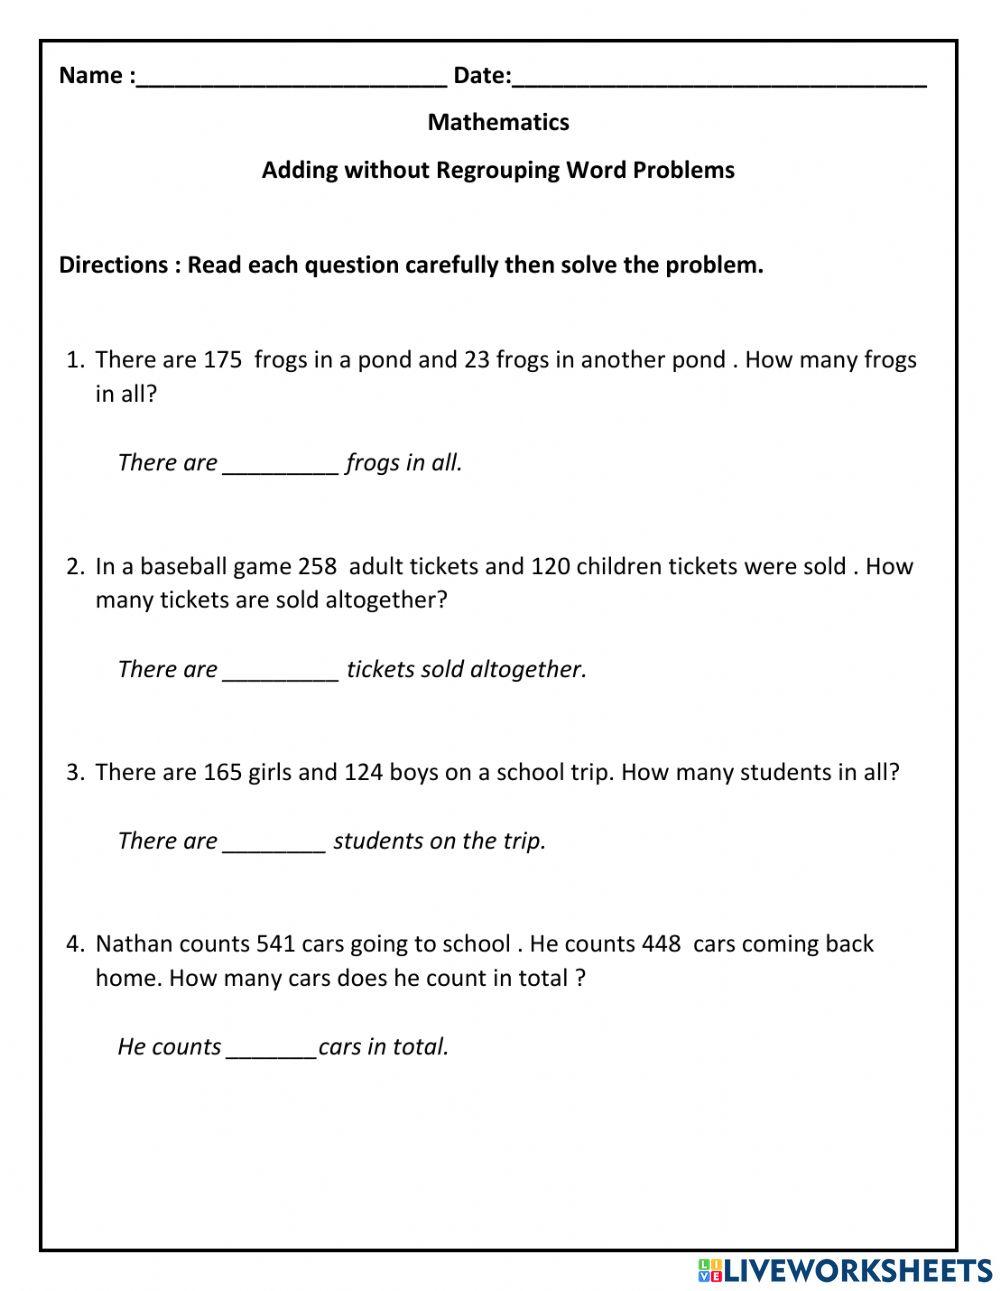 Adding without Regrouping Word Problems